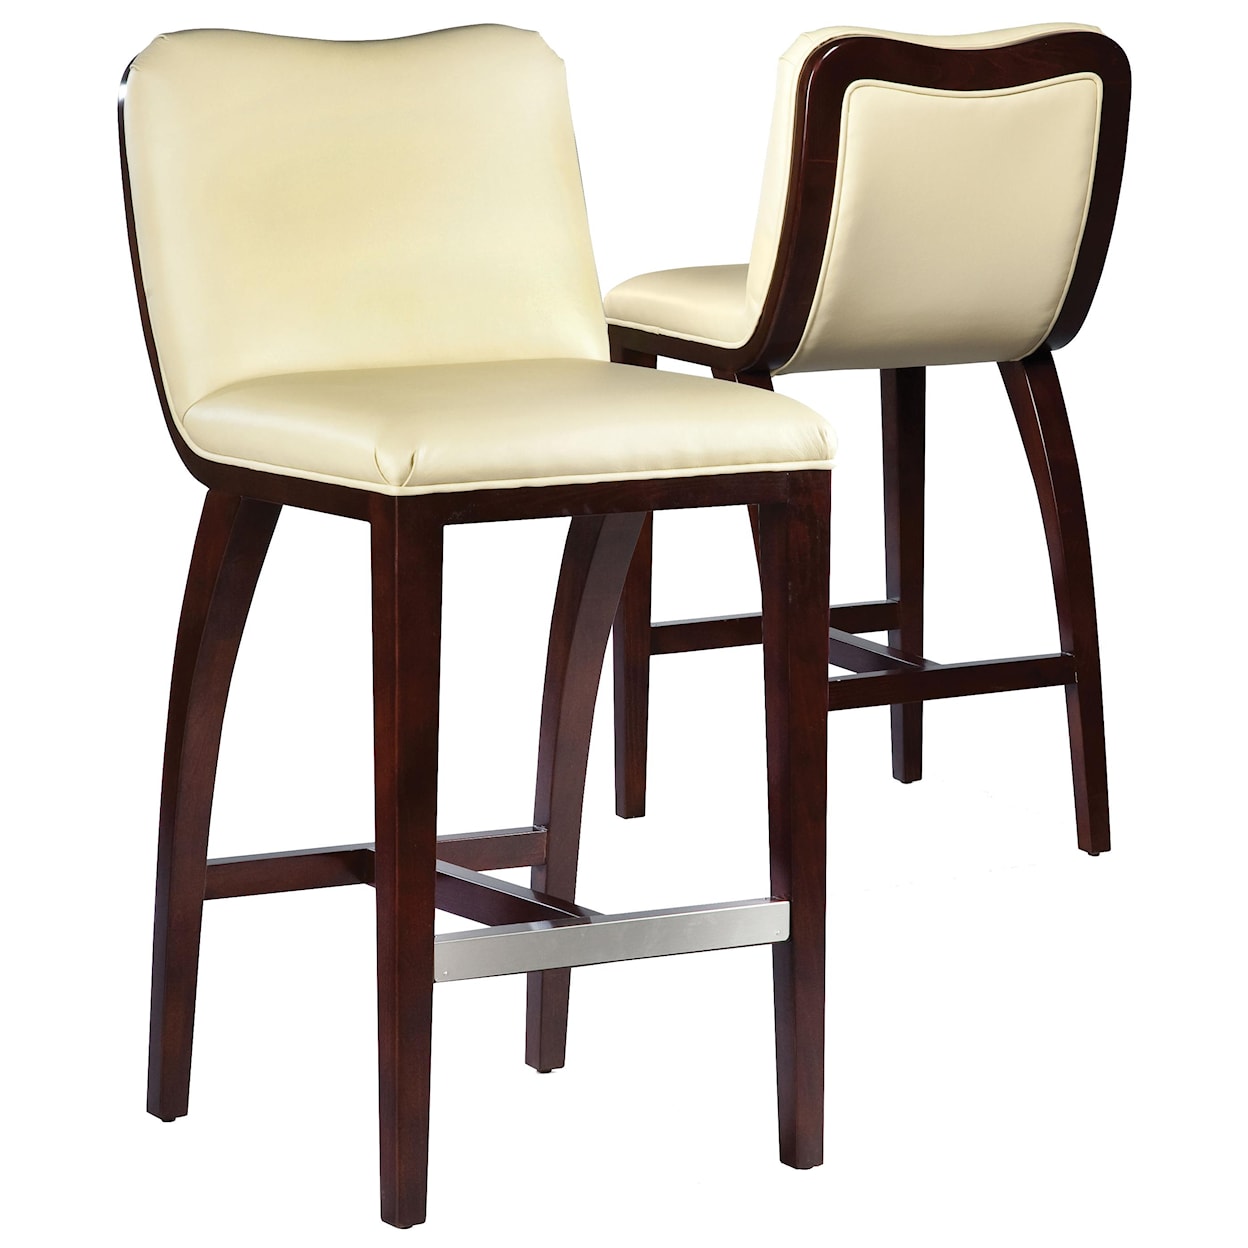 Fairfield Barstools  High End Bar Stool with Wood Accents